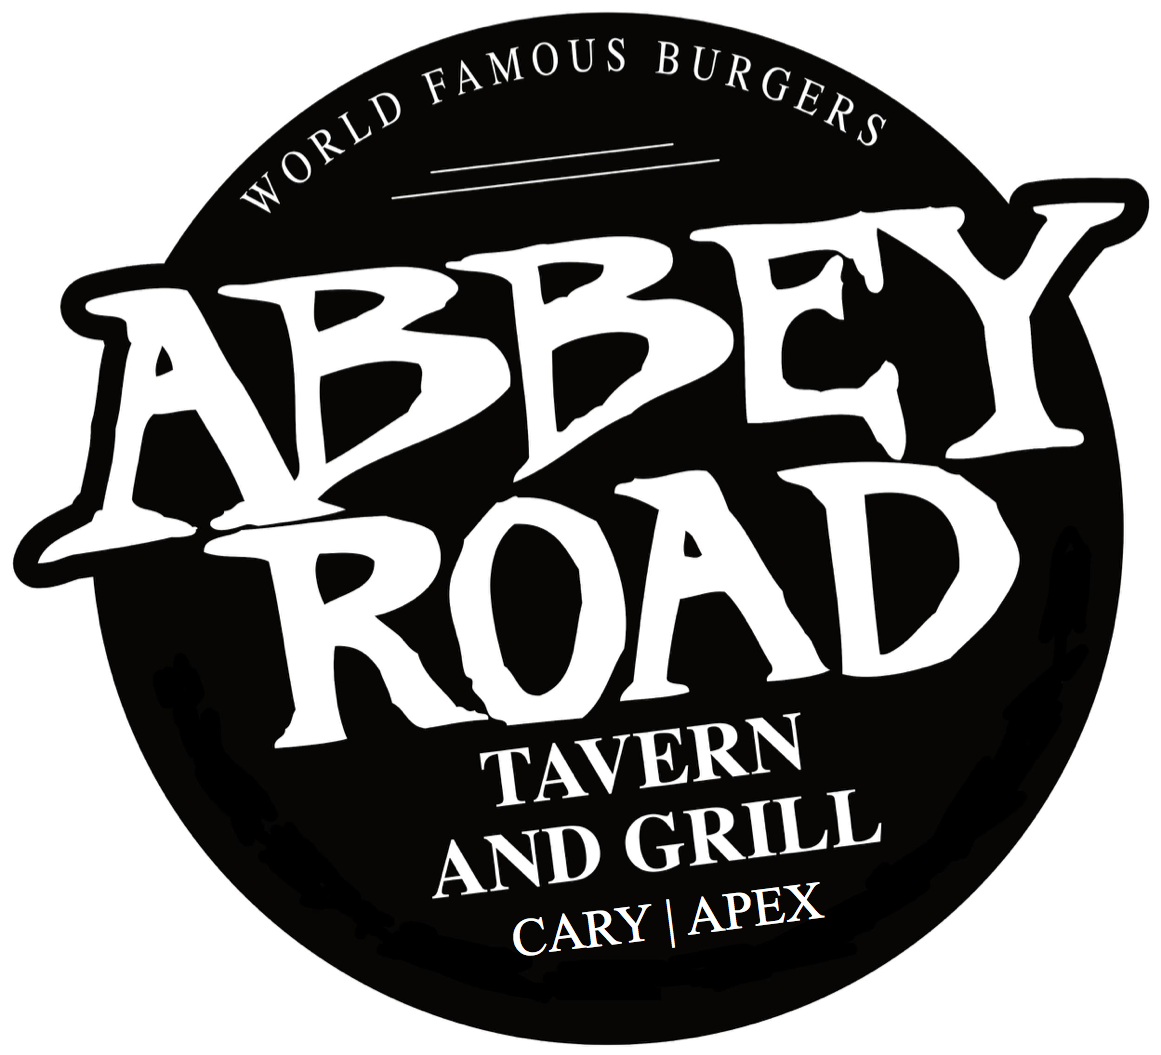 Abbey Road Tavern & Grill Cary 1195 W Chatham st